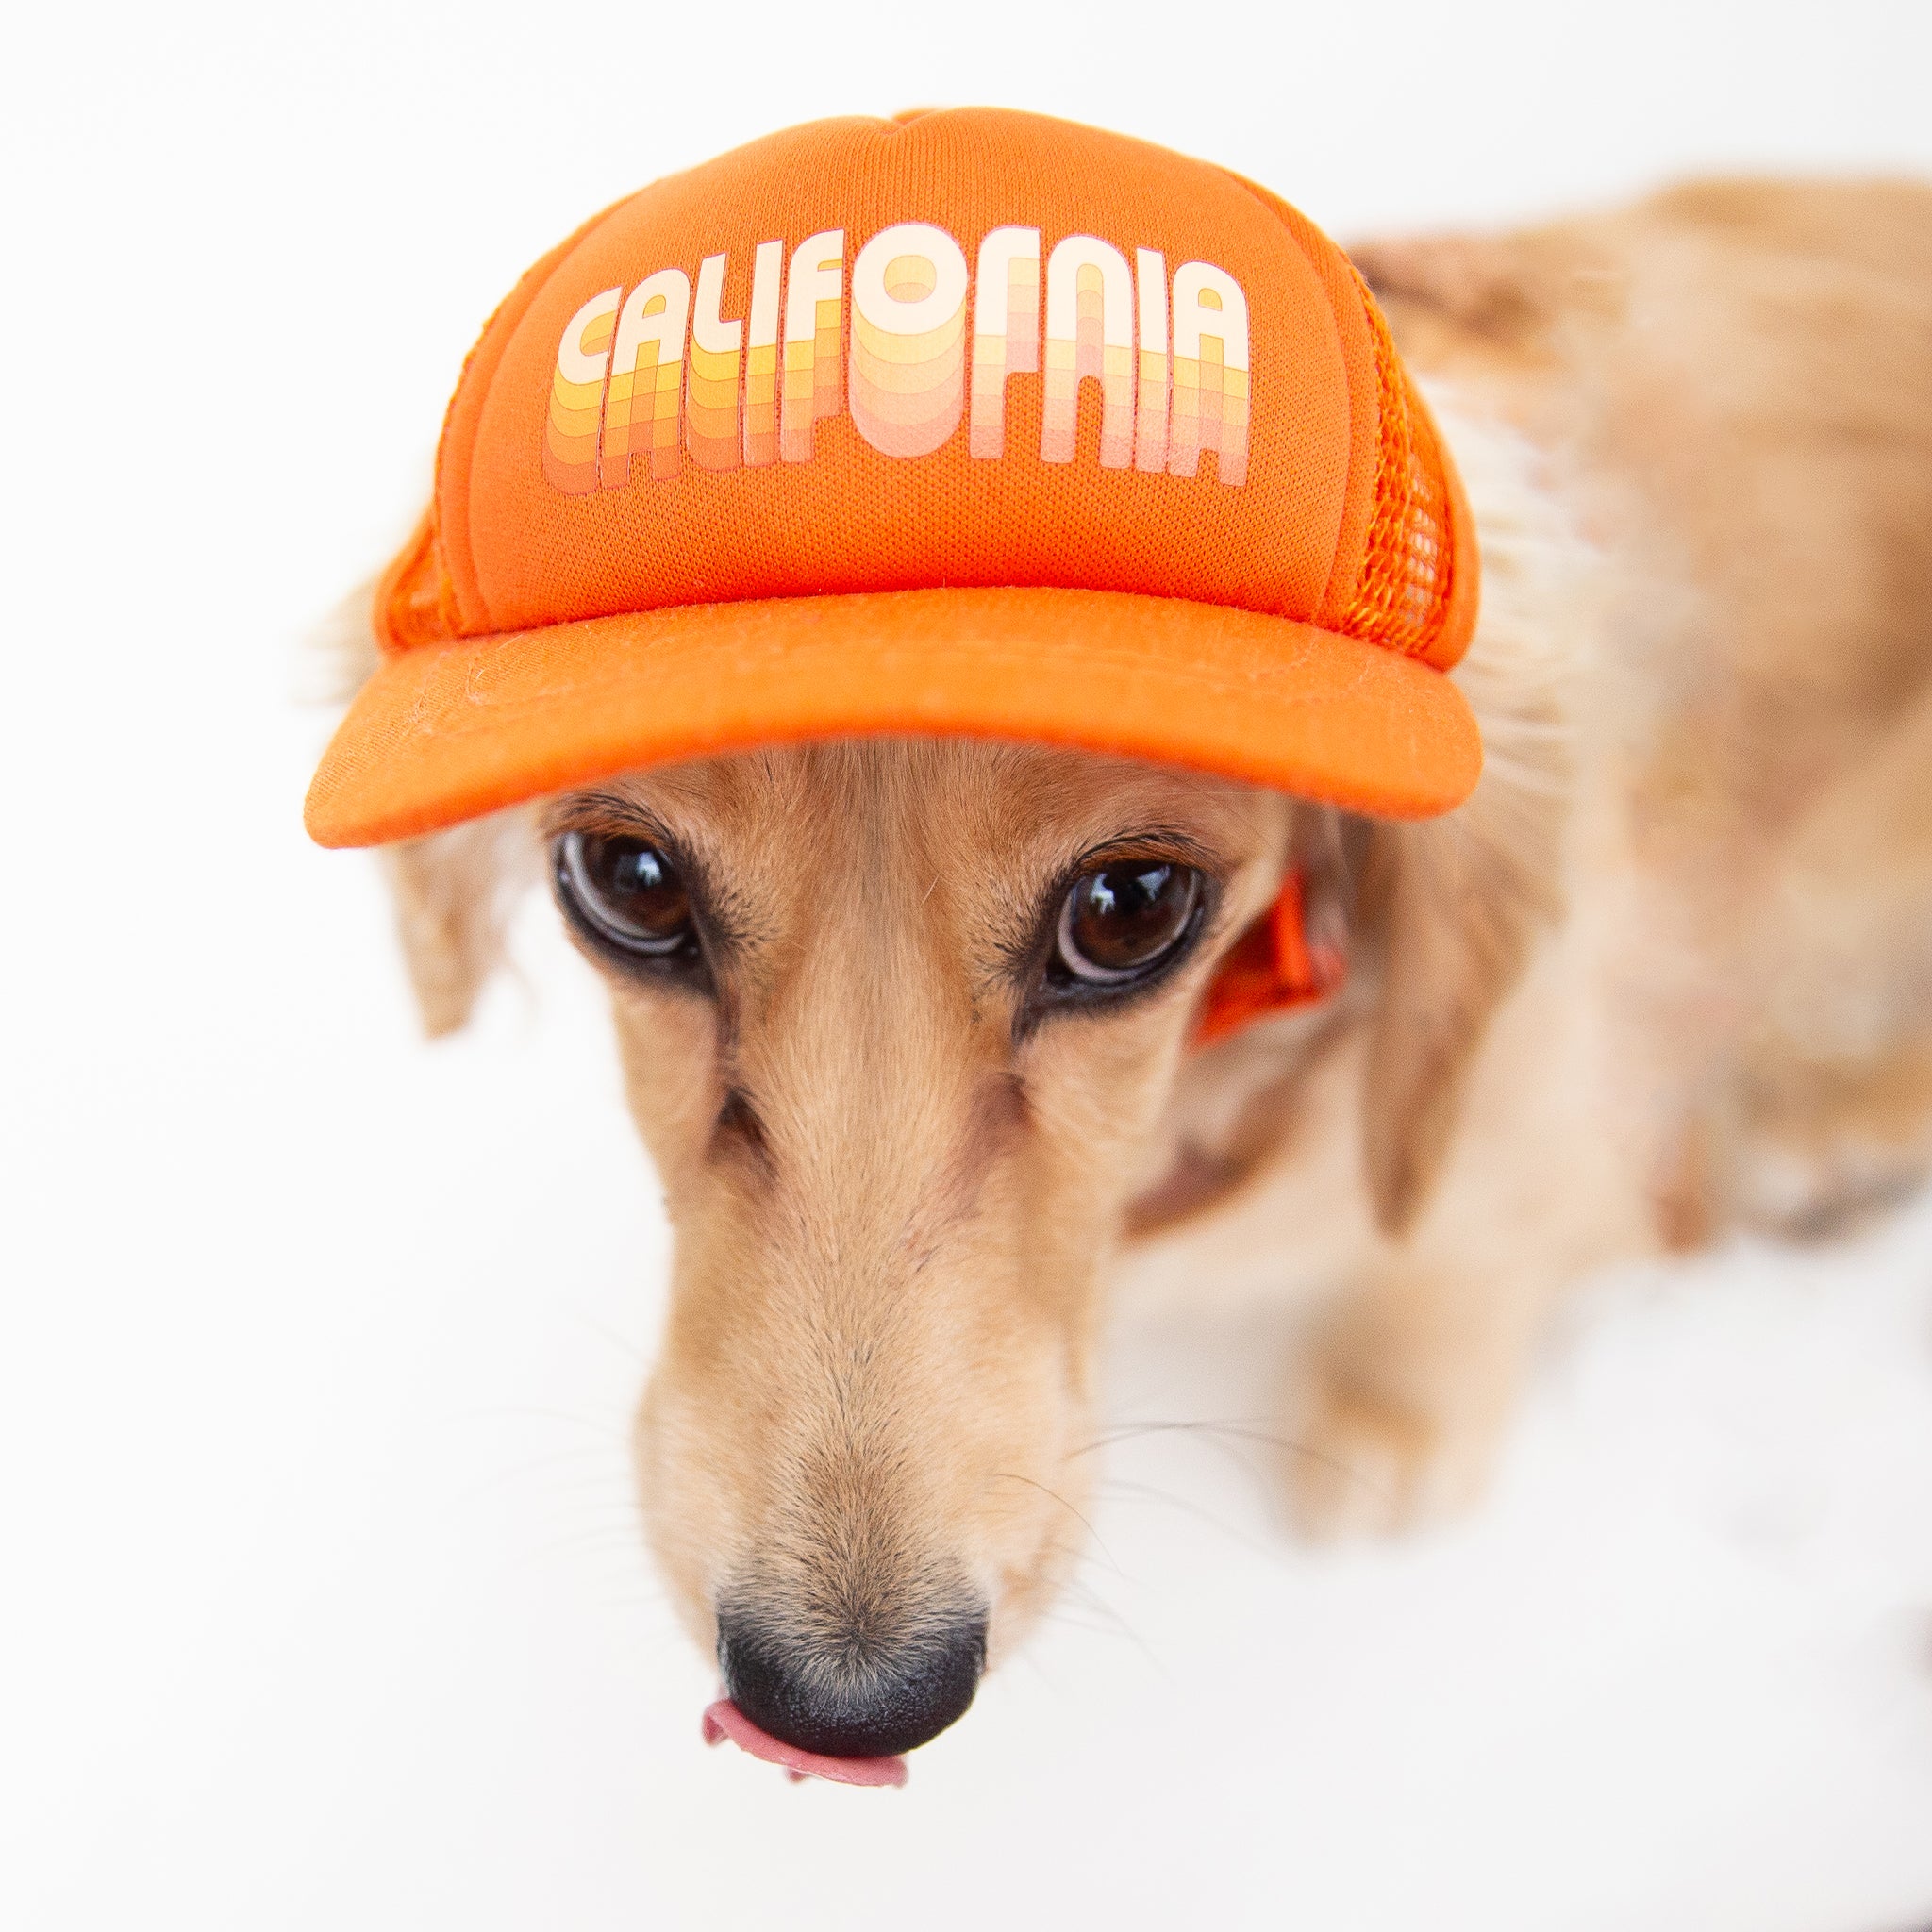 An orange puplid hat with white text that reads, "California".